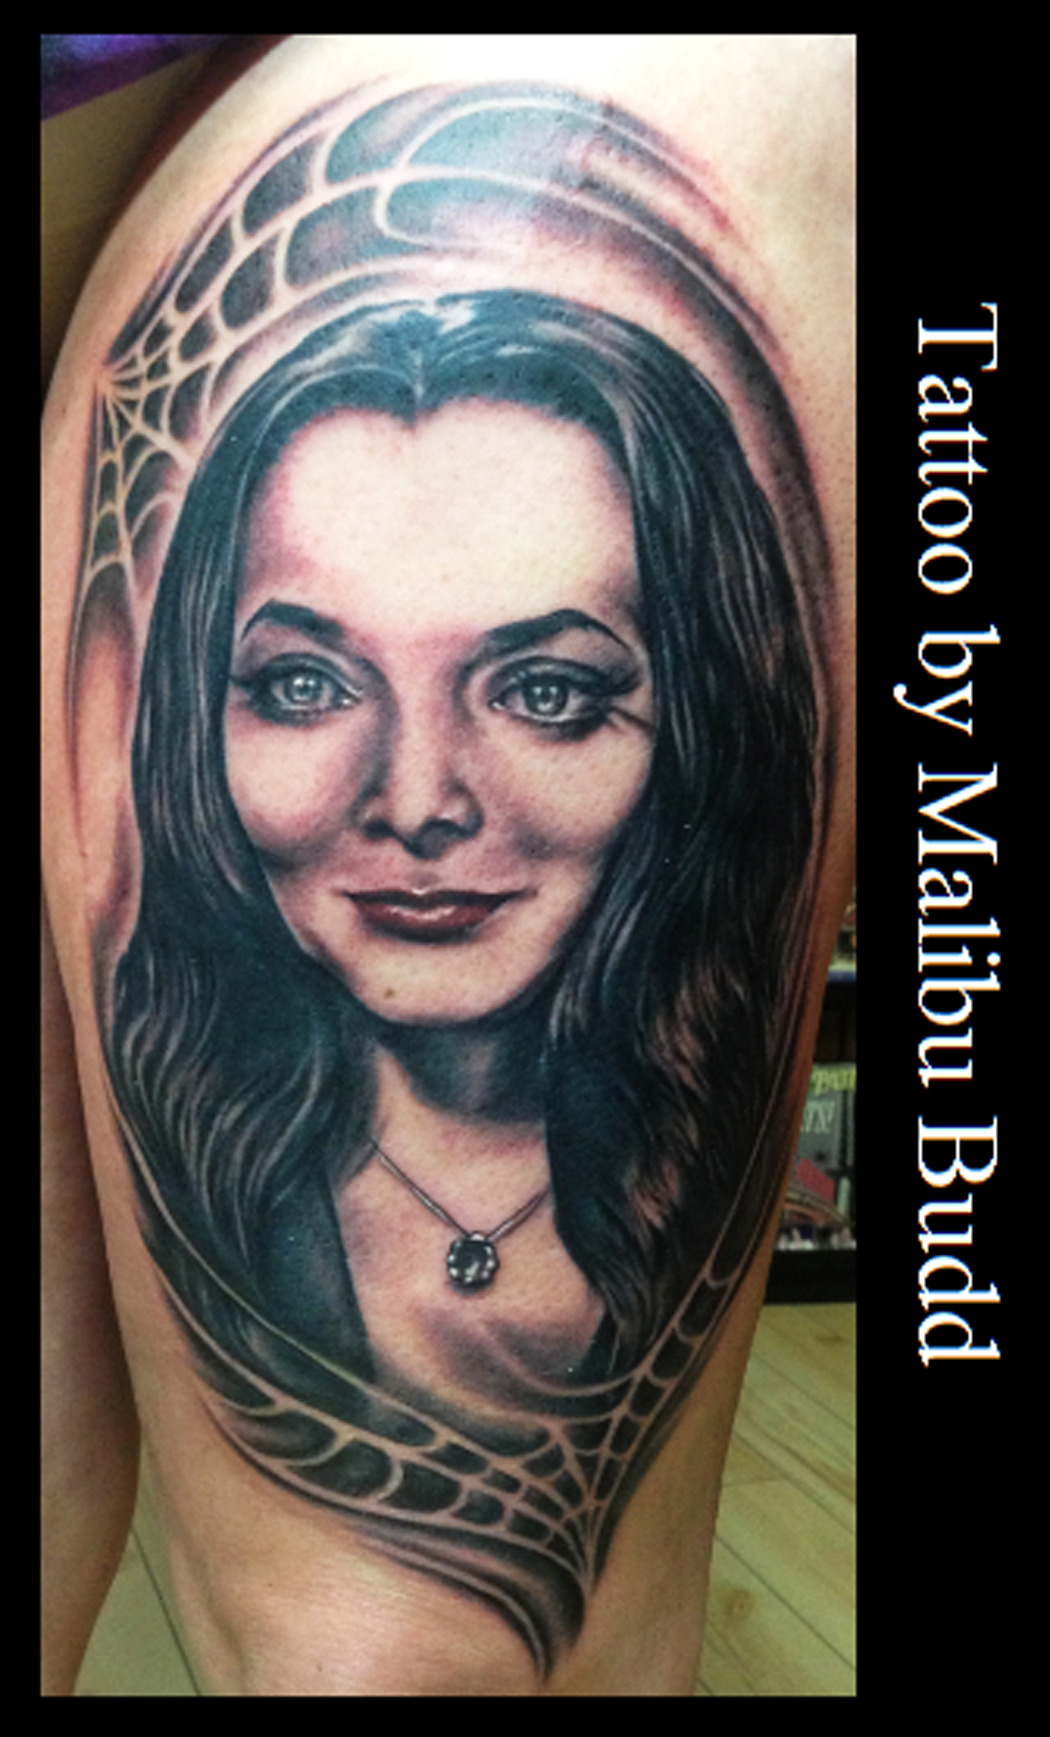 Buy Forever True Adams Family Morticia Gomez Tattoo Flash Online in India   Etsy